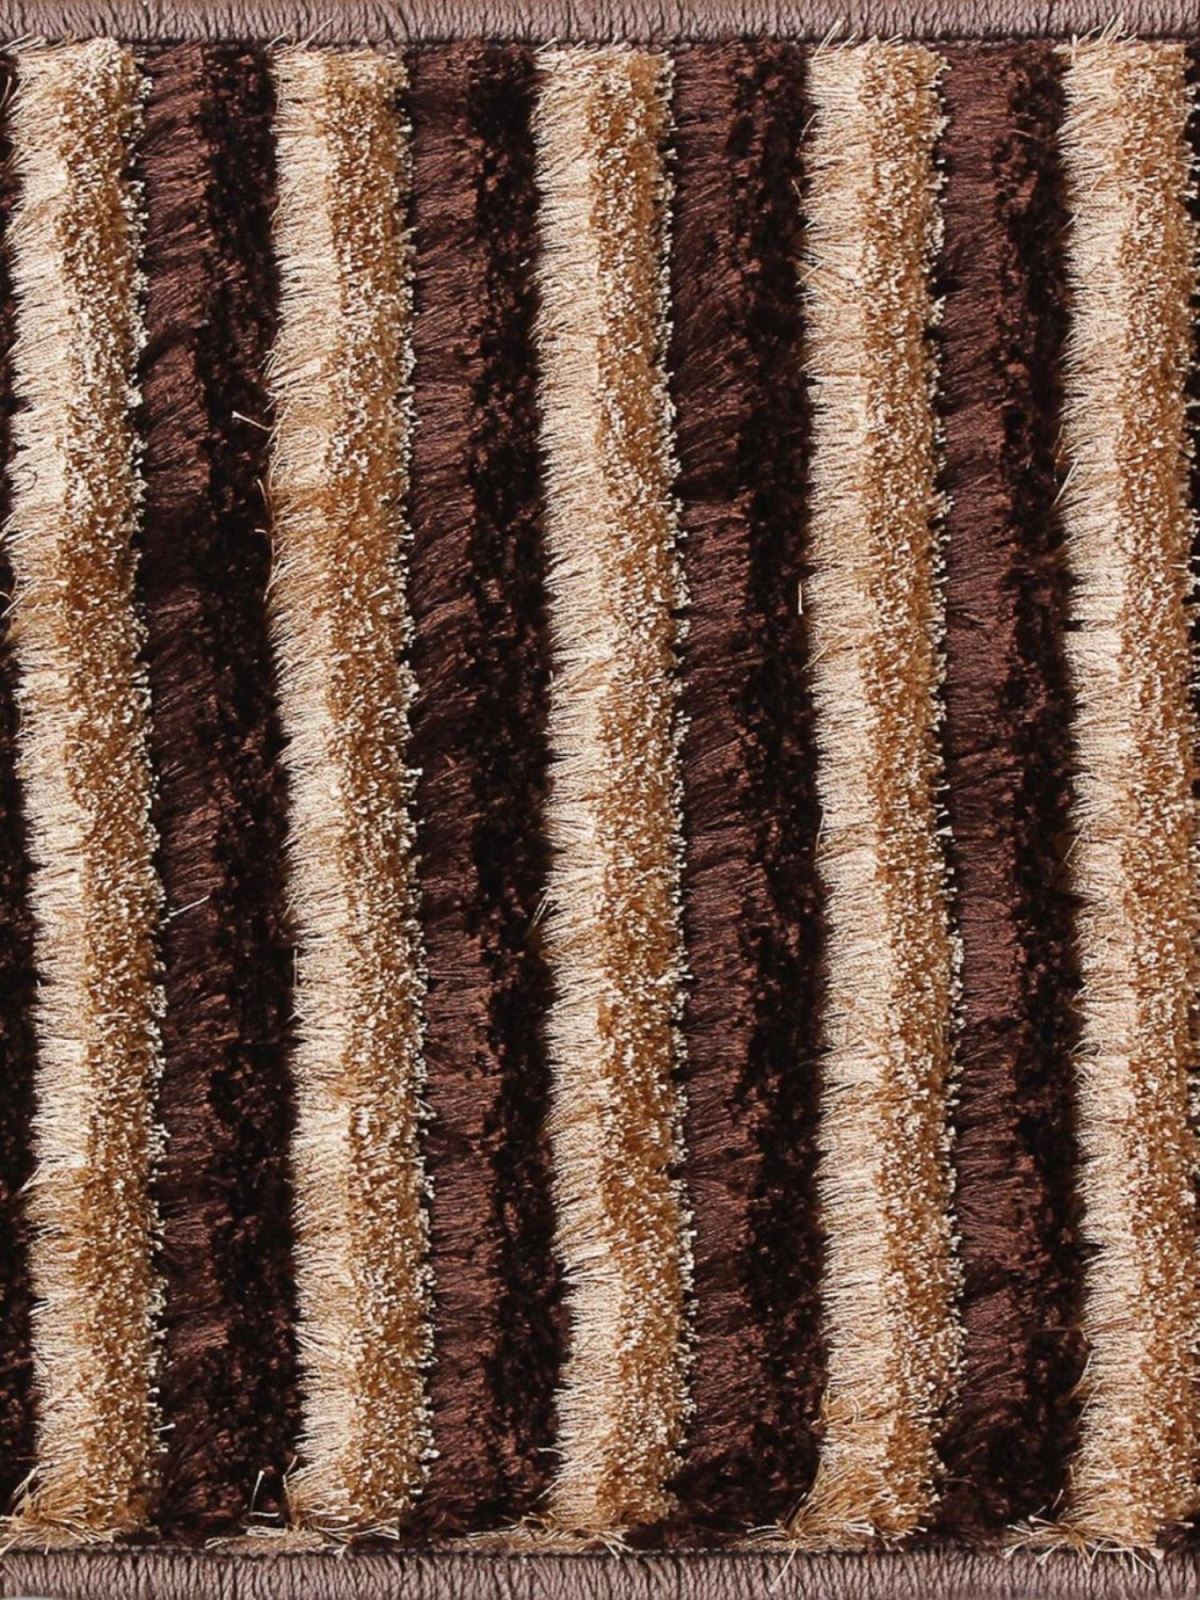 Brown & Gold Striped Polyester Shaggy Anti-Skid Doormat